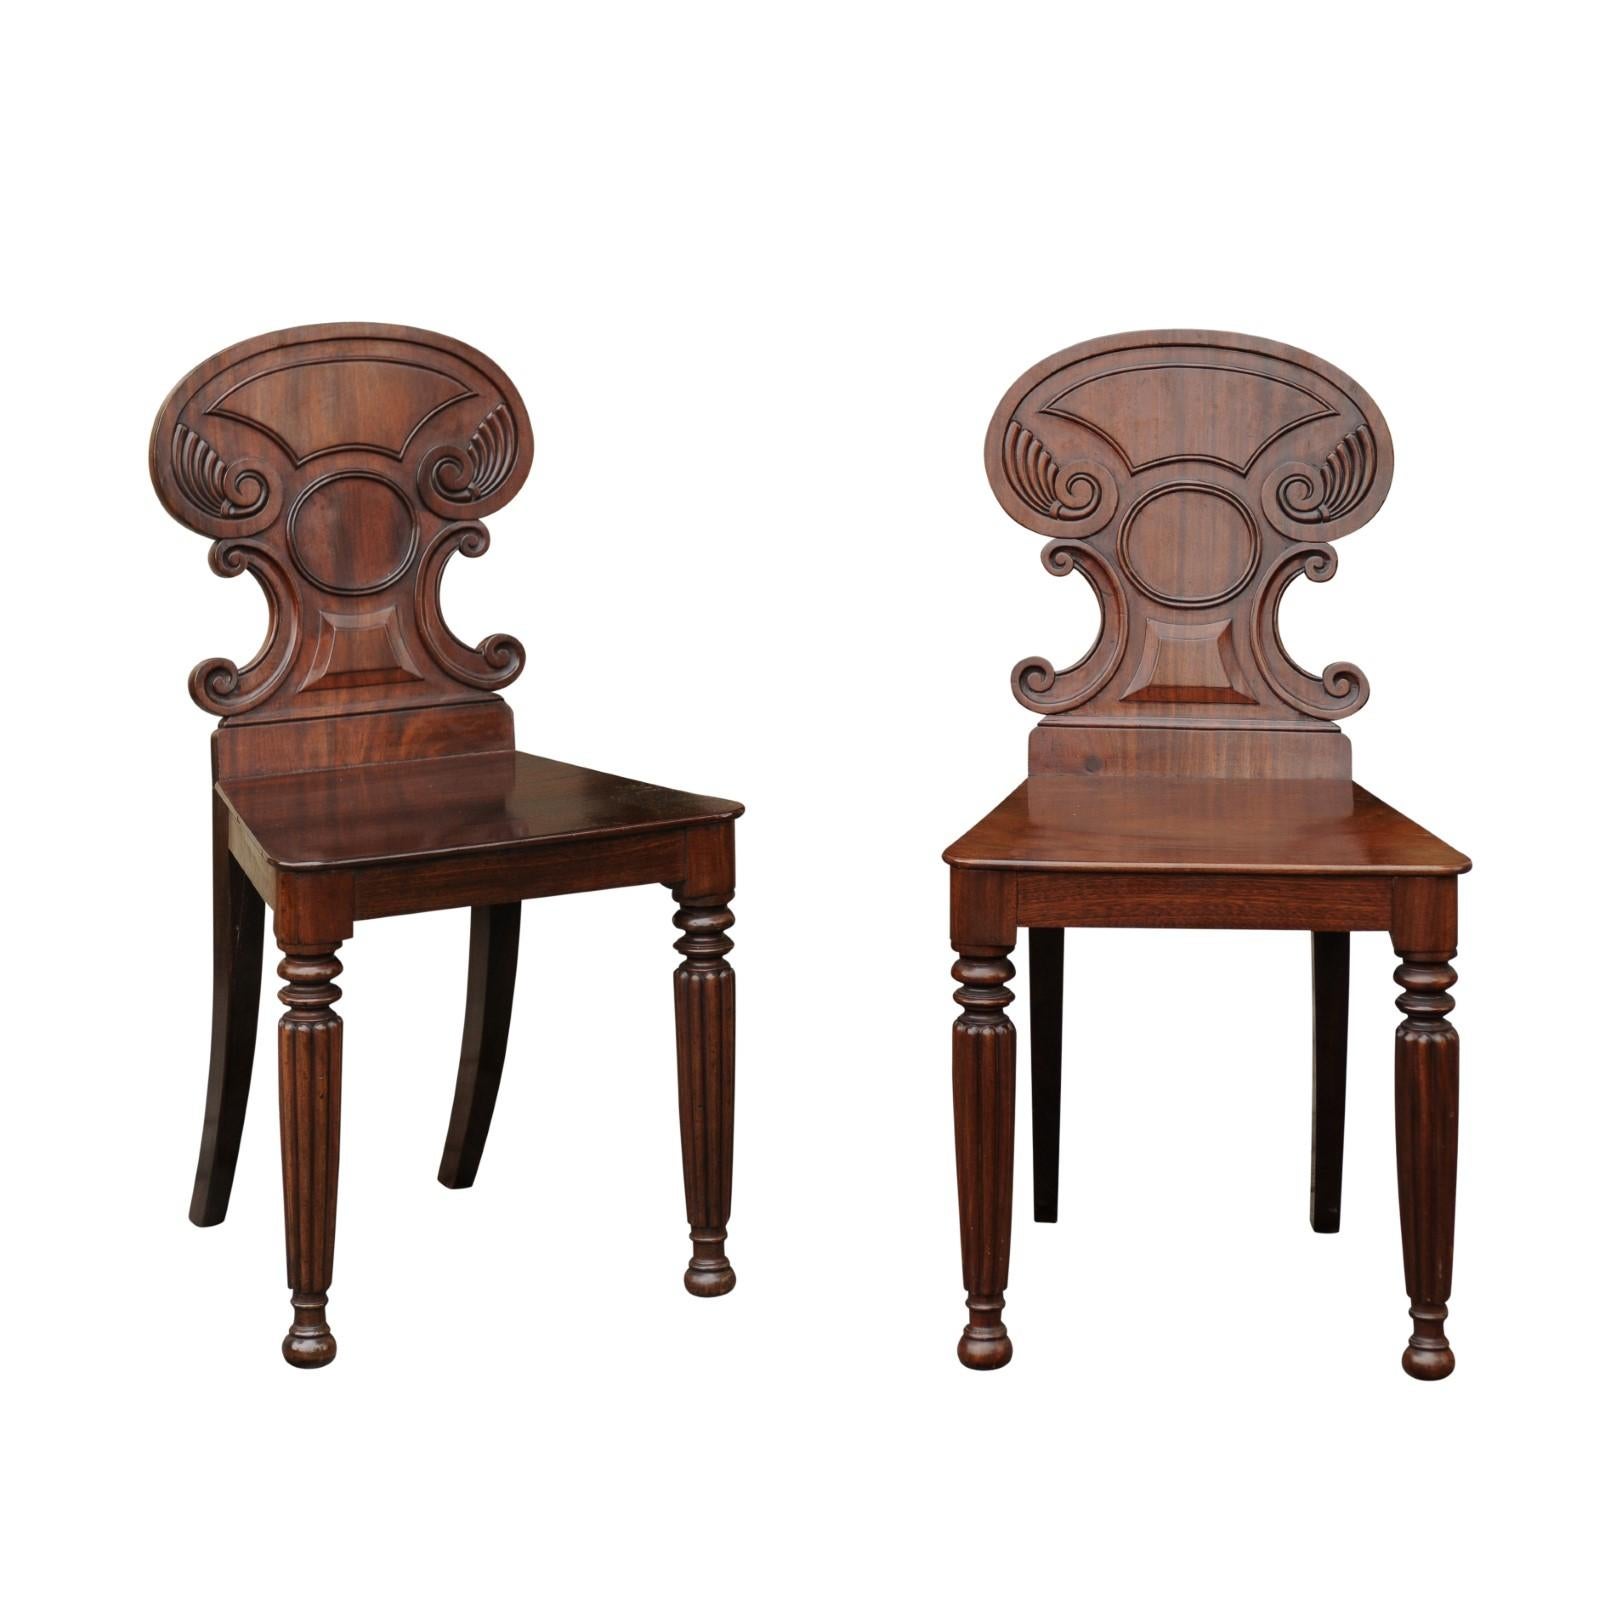 Pair of Regency Style 1870s Carved Mahogany Hall Chairs with C-Scroll Backs